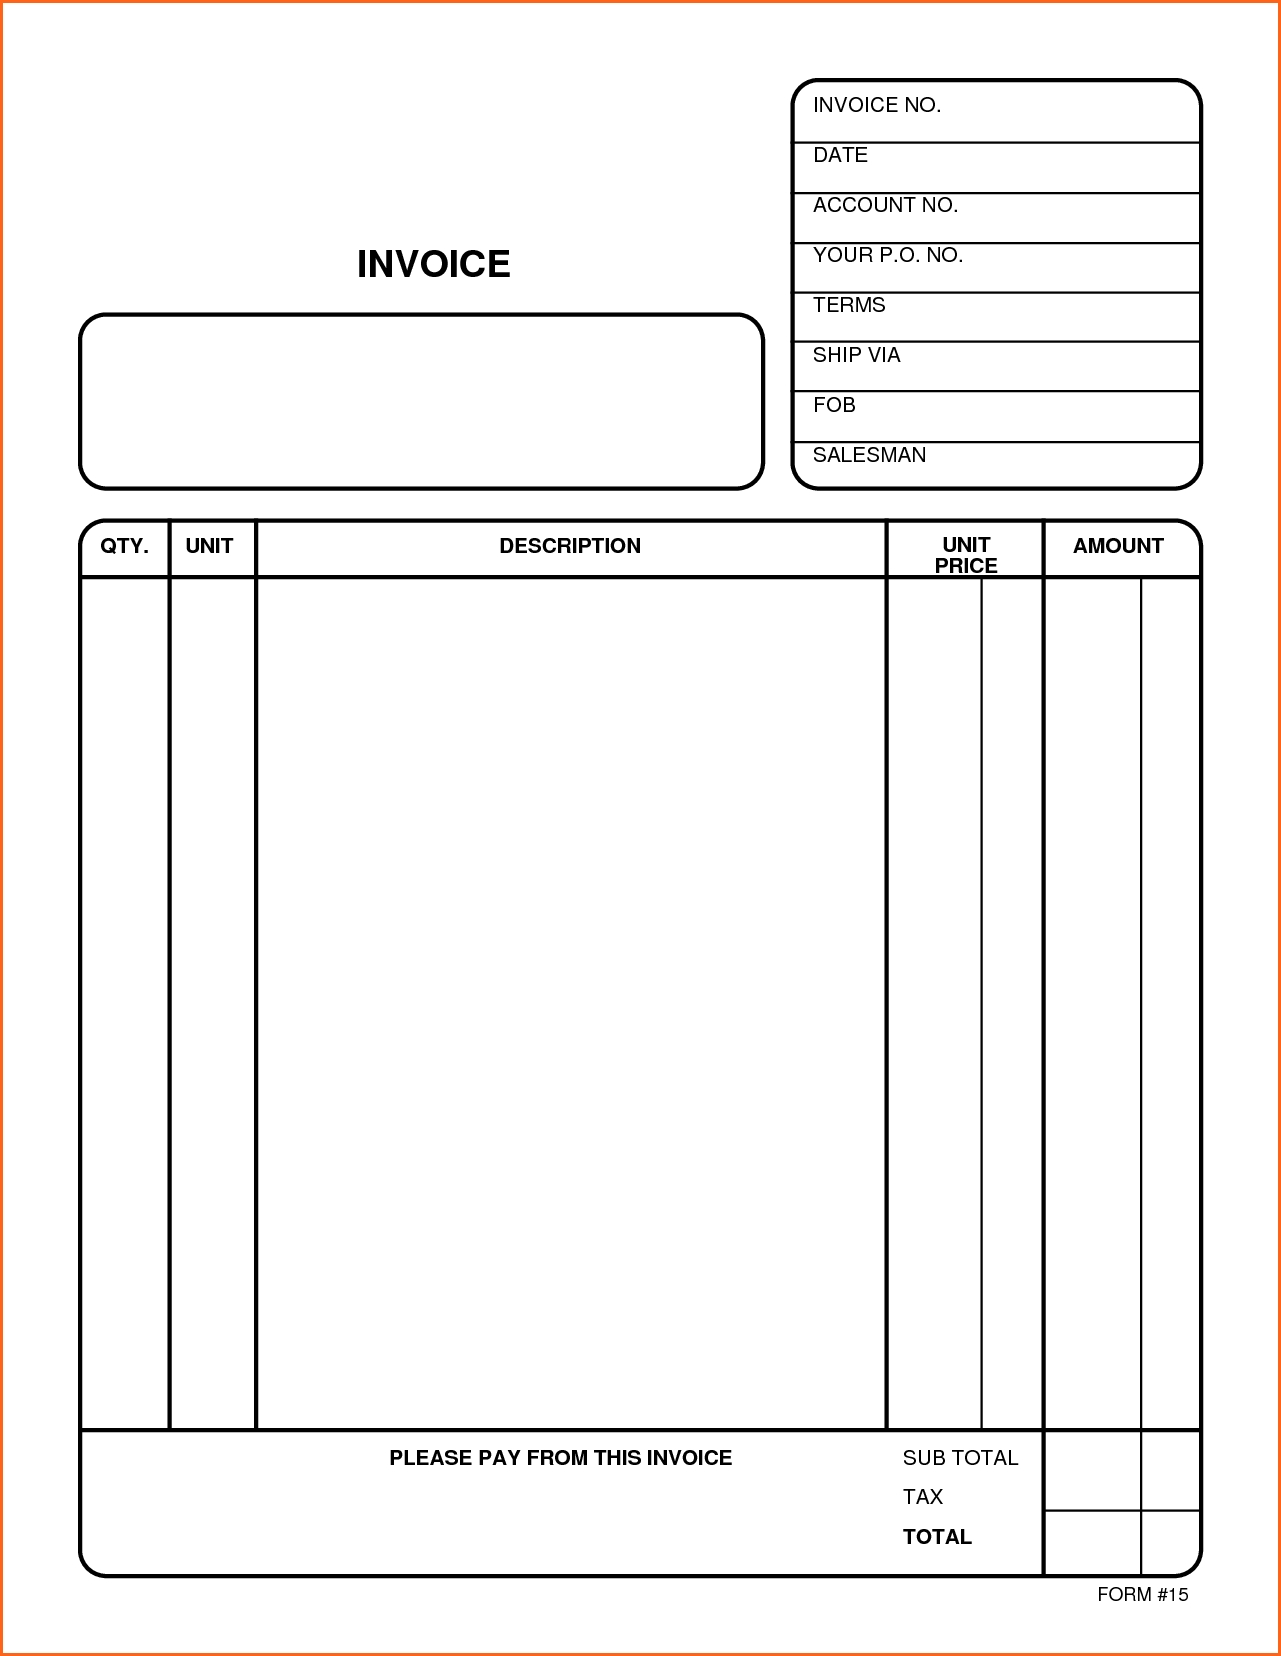 3 free invoices online budget template letter free invoices online